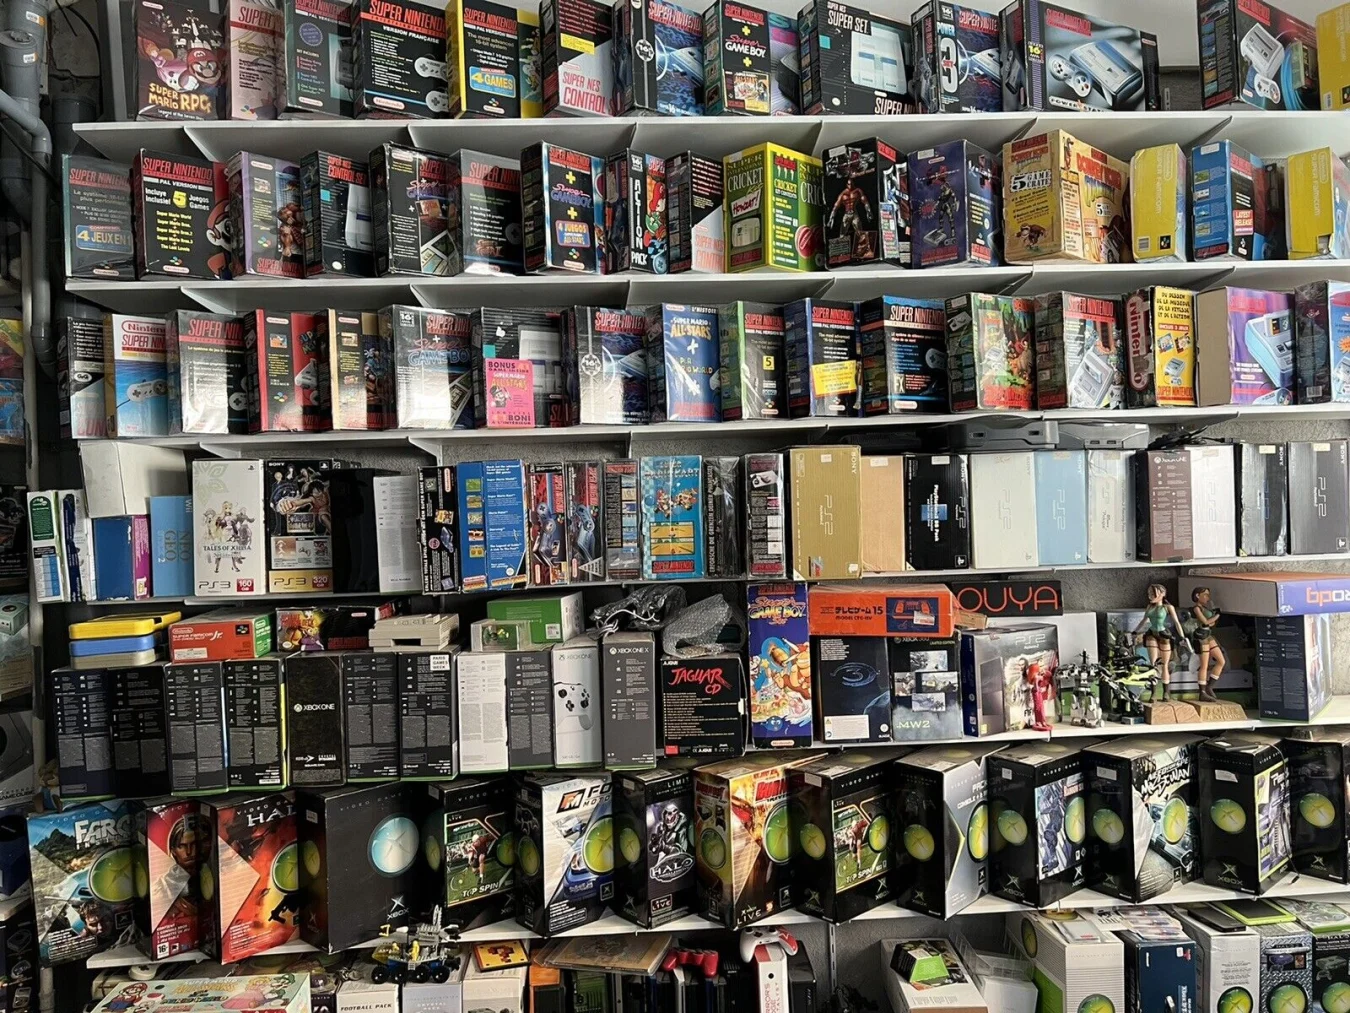 A collection of video game consoles including Nintendo and Xbox products.